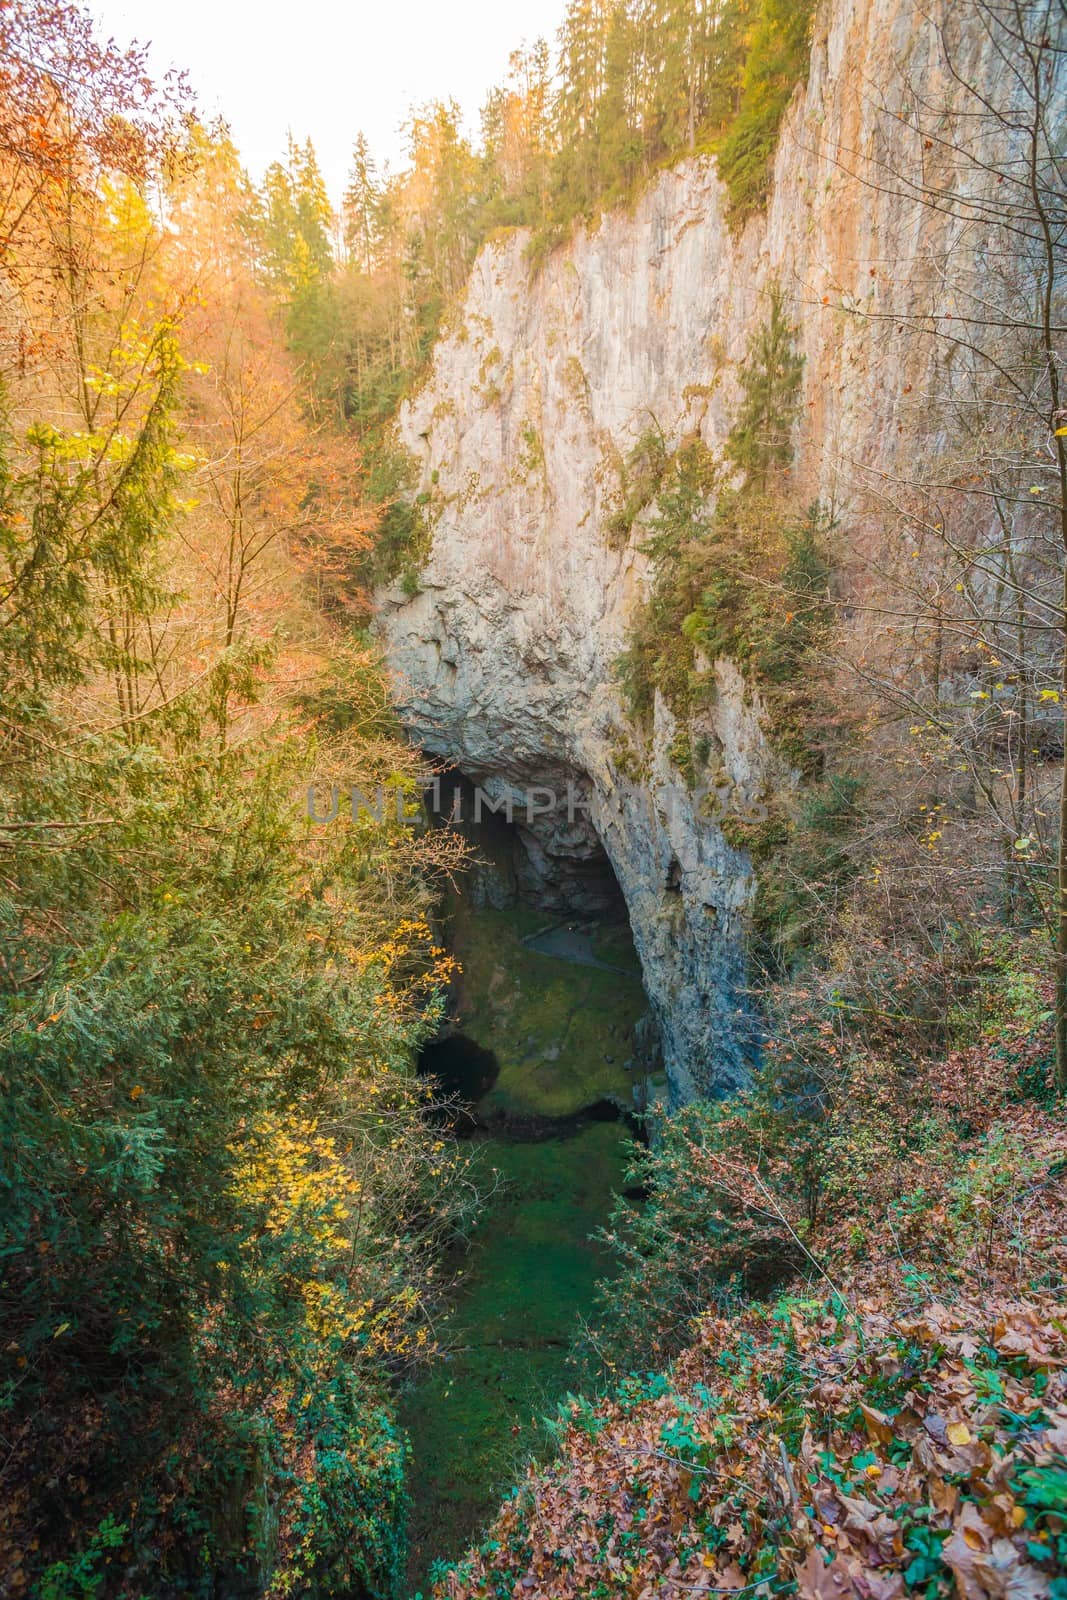 Macocha gorge Abyss, Czech Propast Macocha is sinkhole in the Moravian Karst cave system of the Czech Republic, South Moravia, near city Brno and Blansko. View from top. by petrsvoboda91